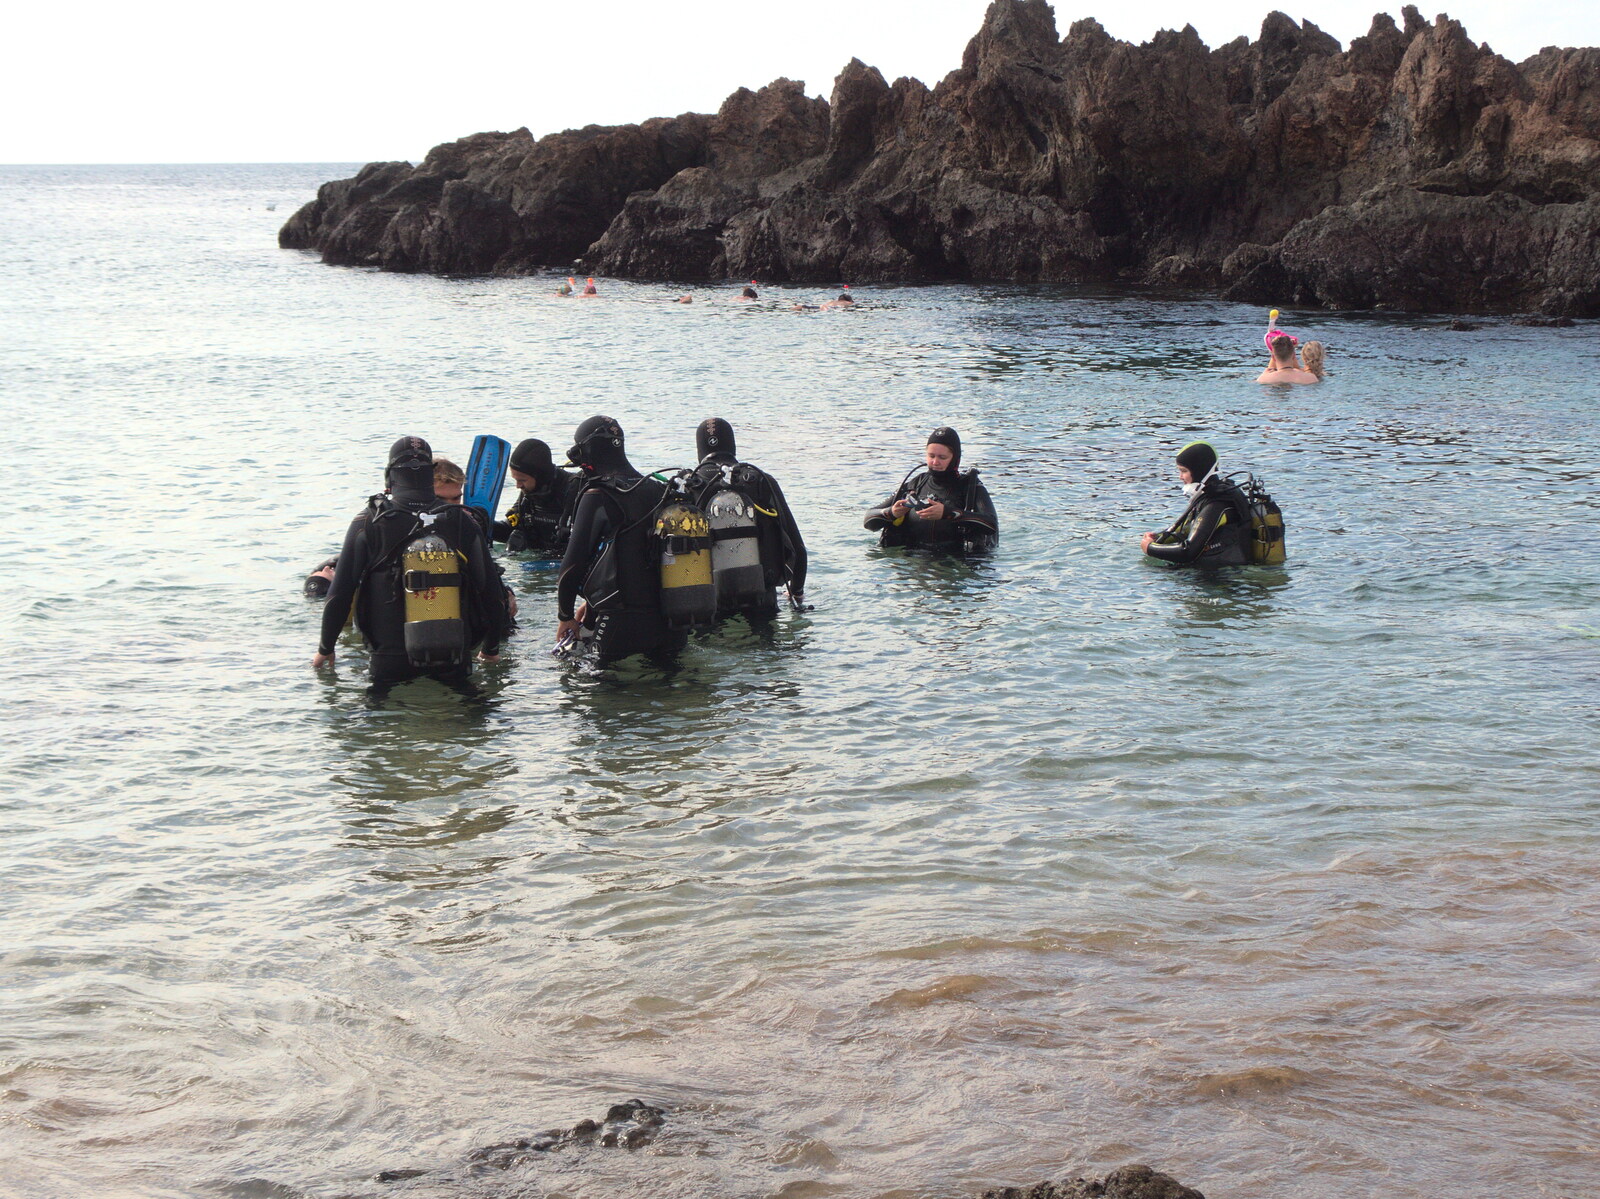 The dive group bobs around at the surface from The Volcanoes of Lanzarote, Canary Islands, Spain - 27th October 2021